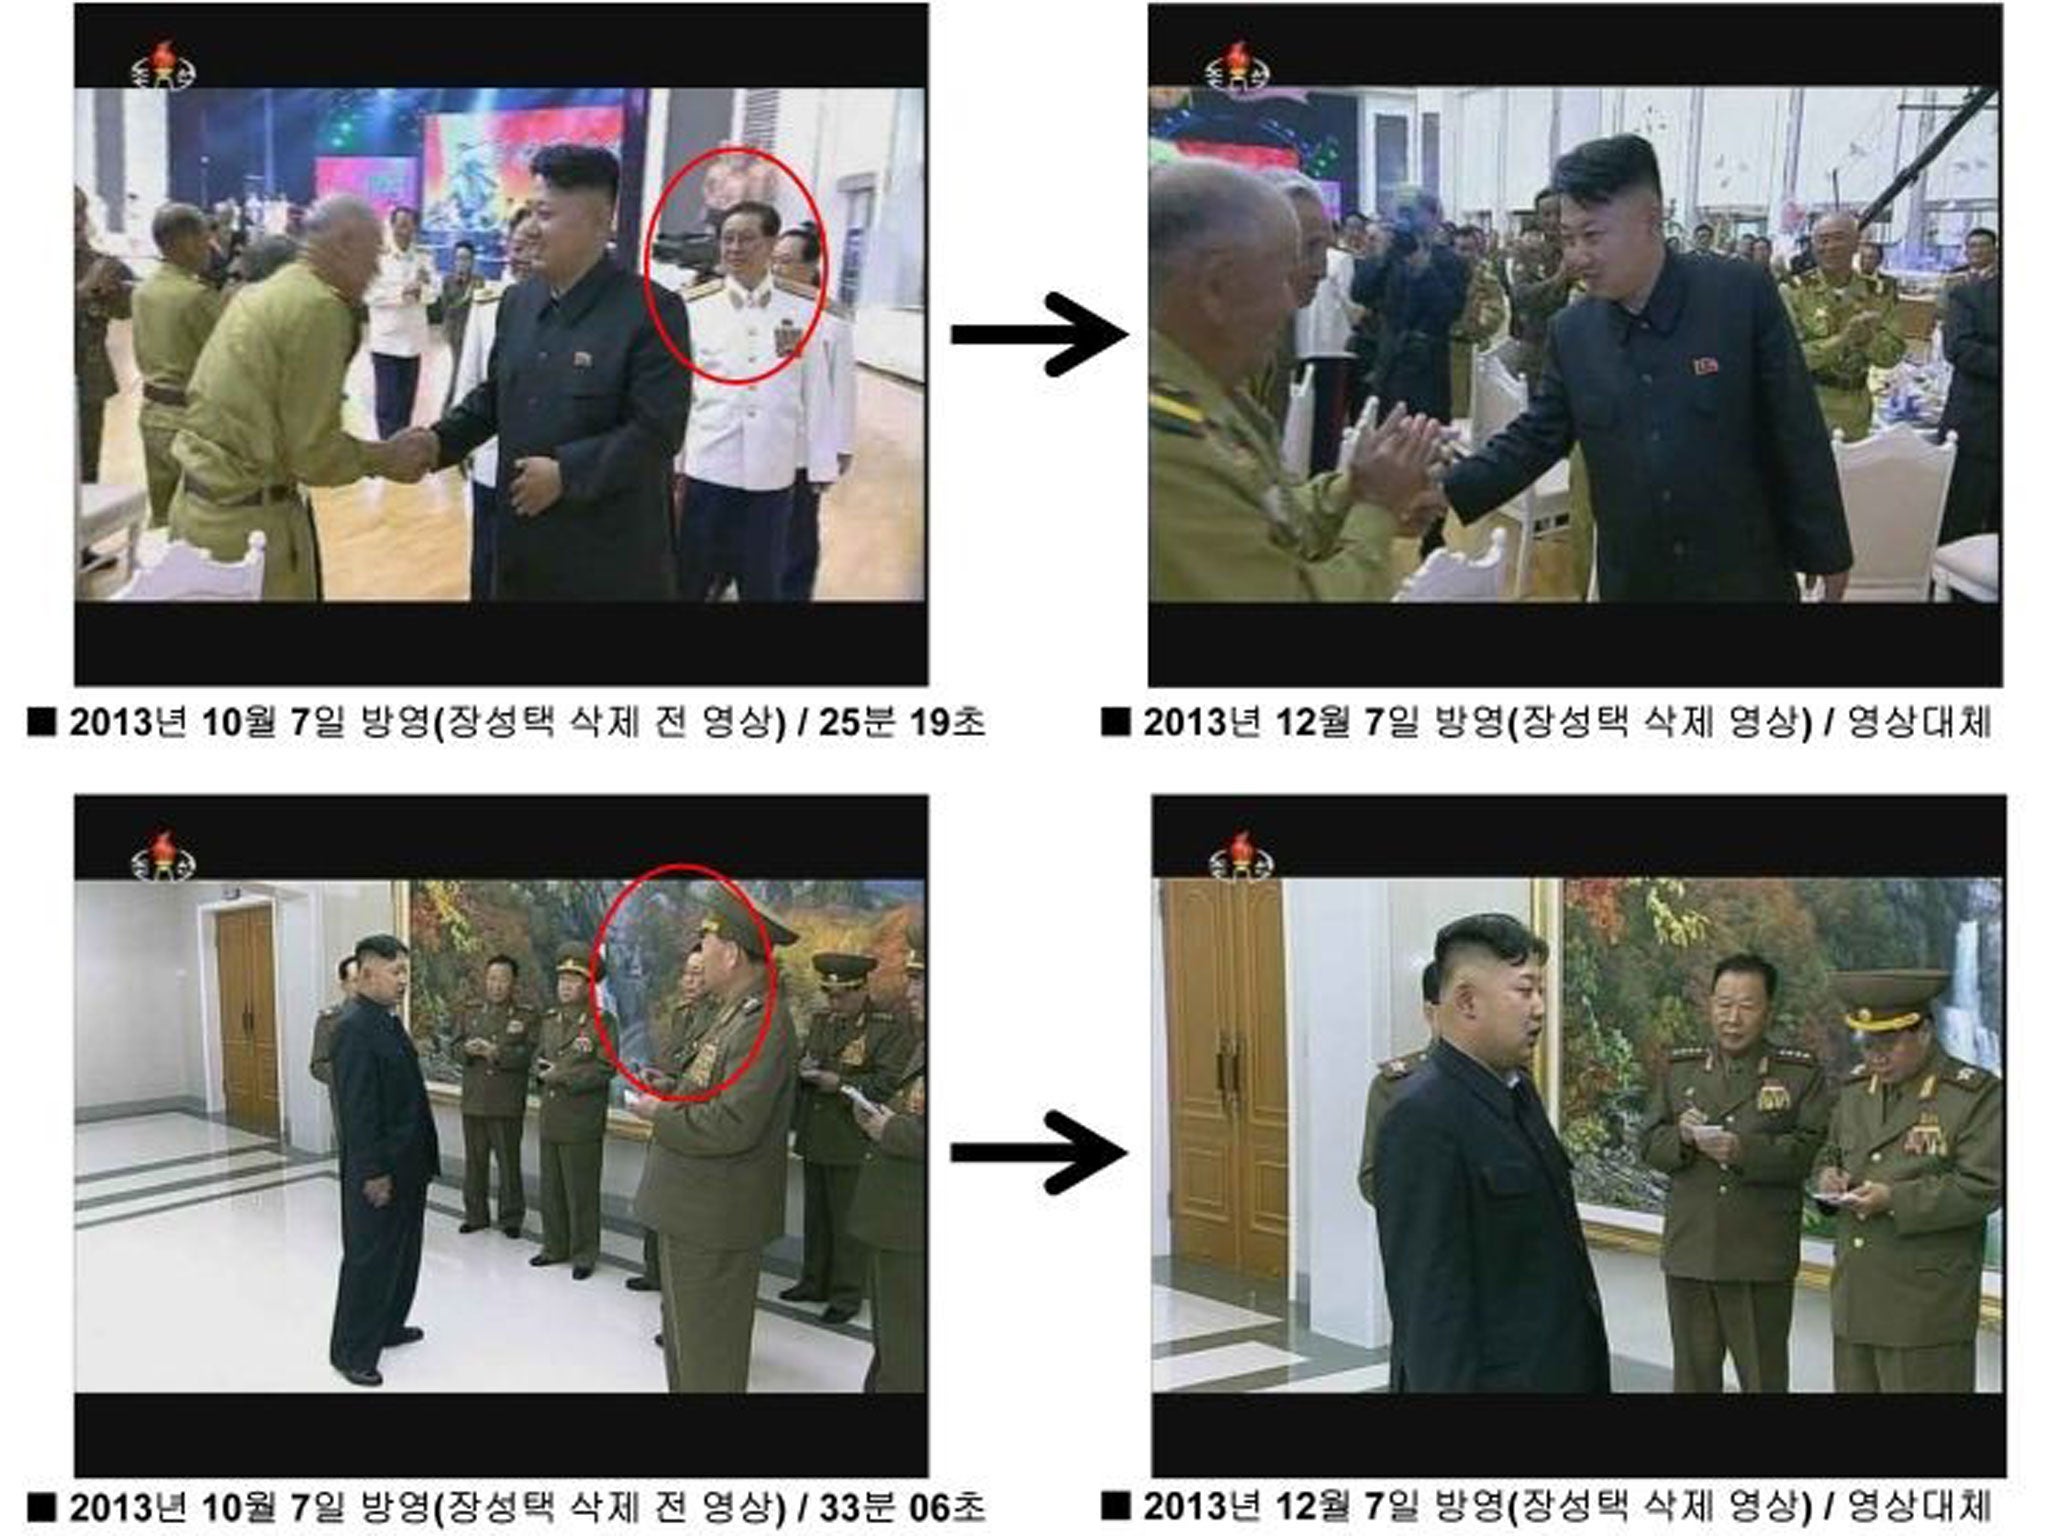 This handout image from South Korea's Ministry of Unification shows before and after photos of still grabs taken from the documentary 'The Great Comrade', re-broadcast on North Korean state broadcaster KCTV showing scenes from the original version (L) and of the recently rebroadcast version (R) where the powerful uncle of North Korean leader Kim Jong-Un, Kim Jong-Un (in the red circle), was edited out of footage